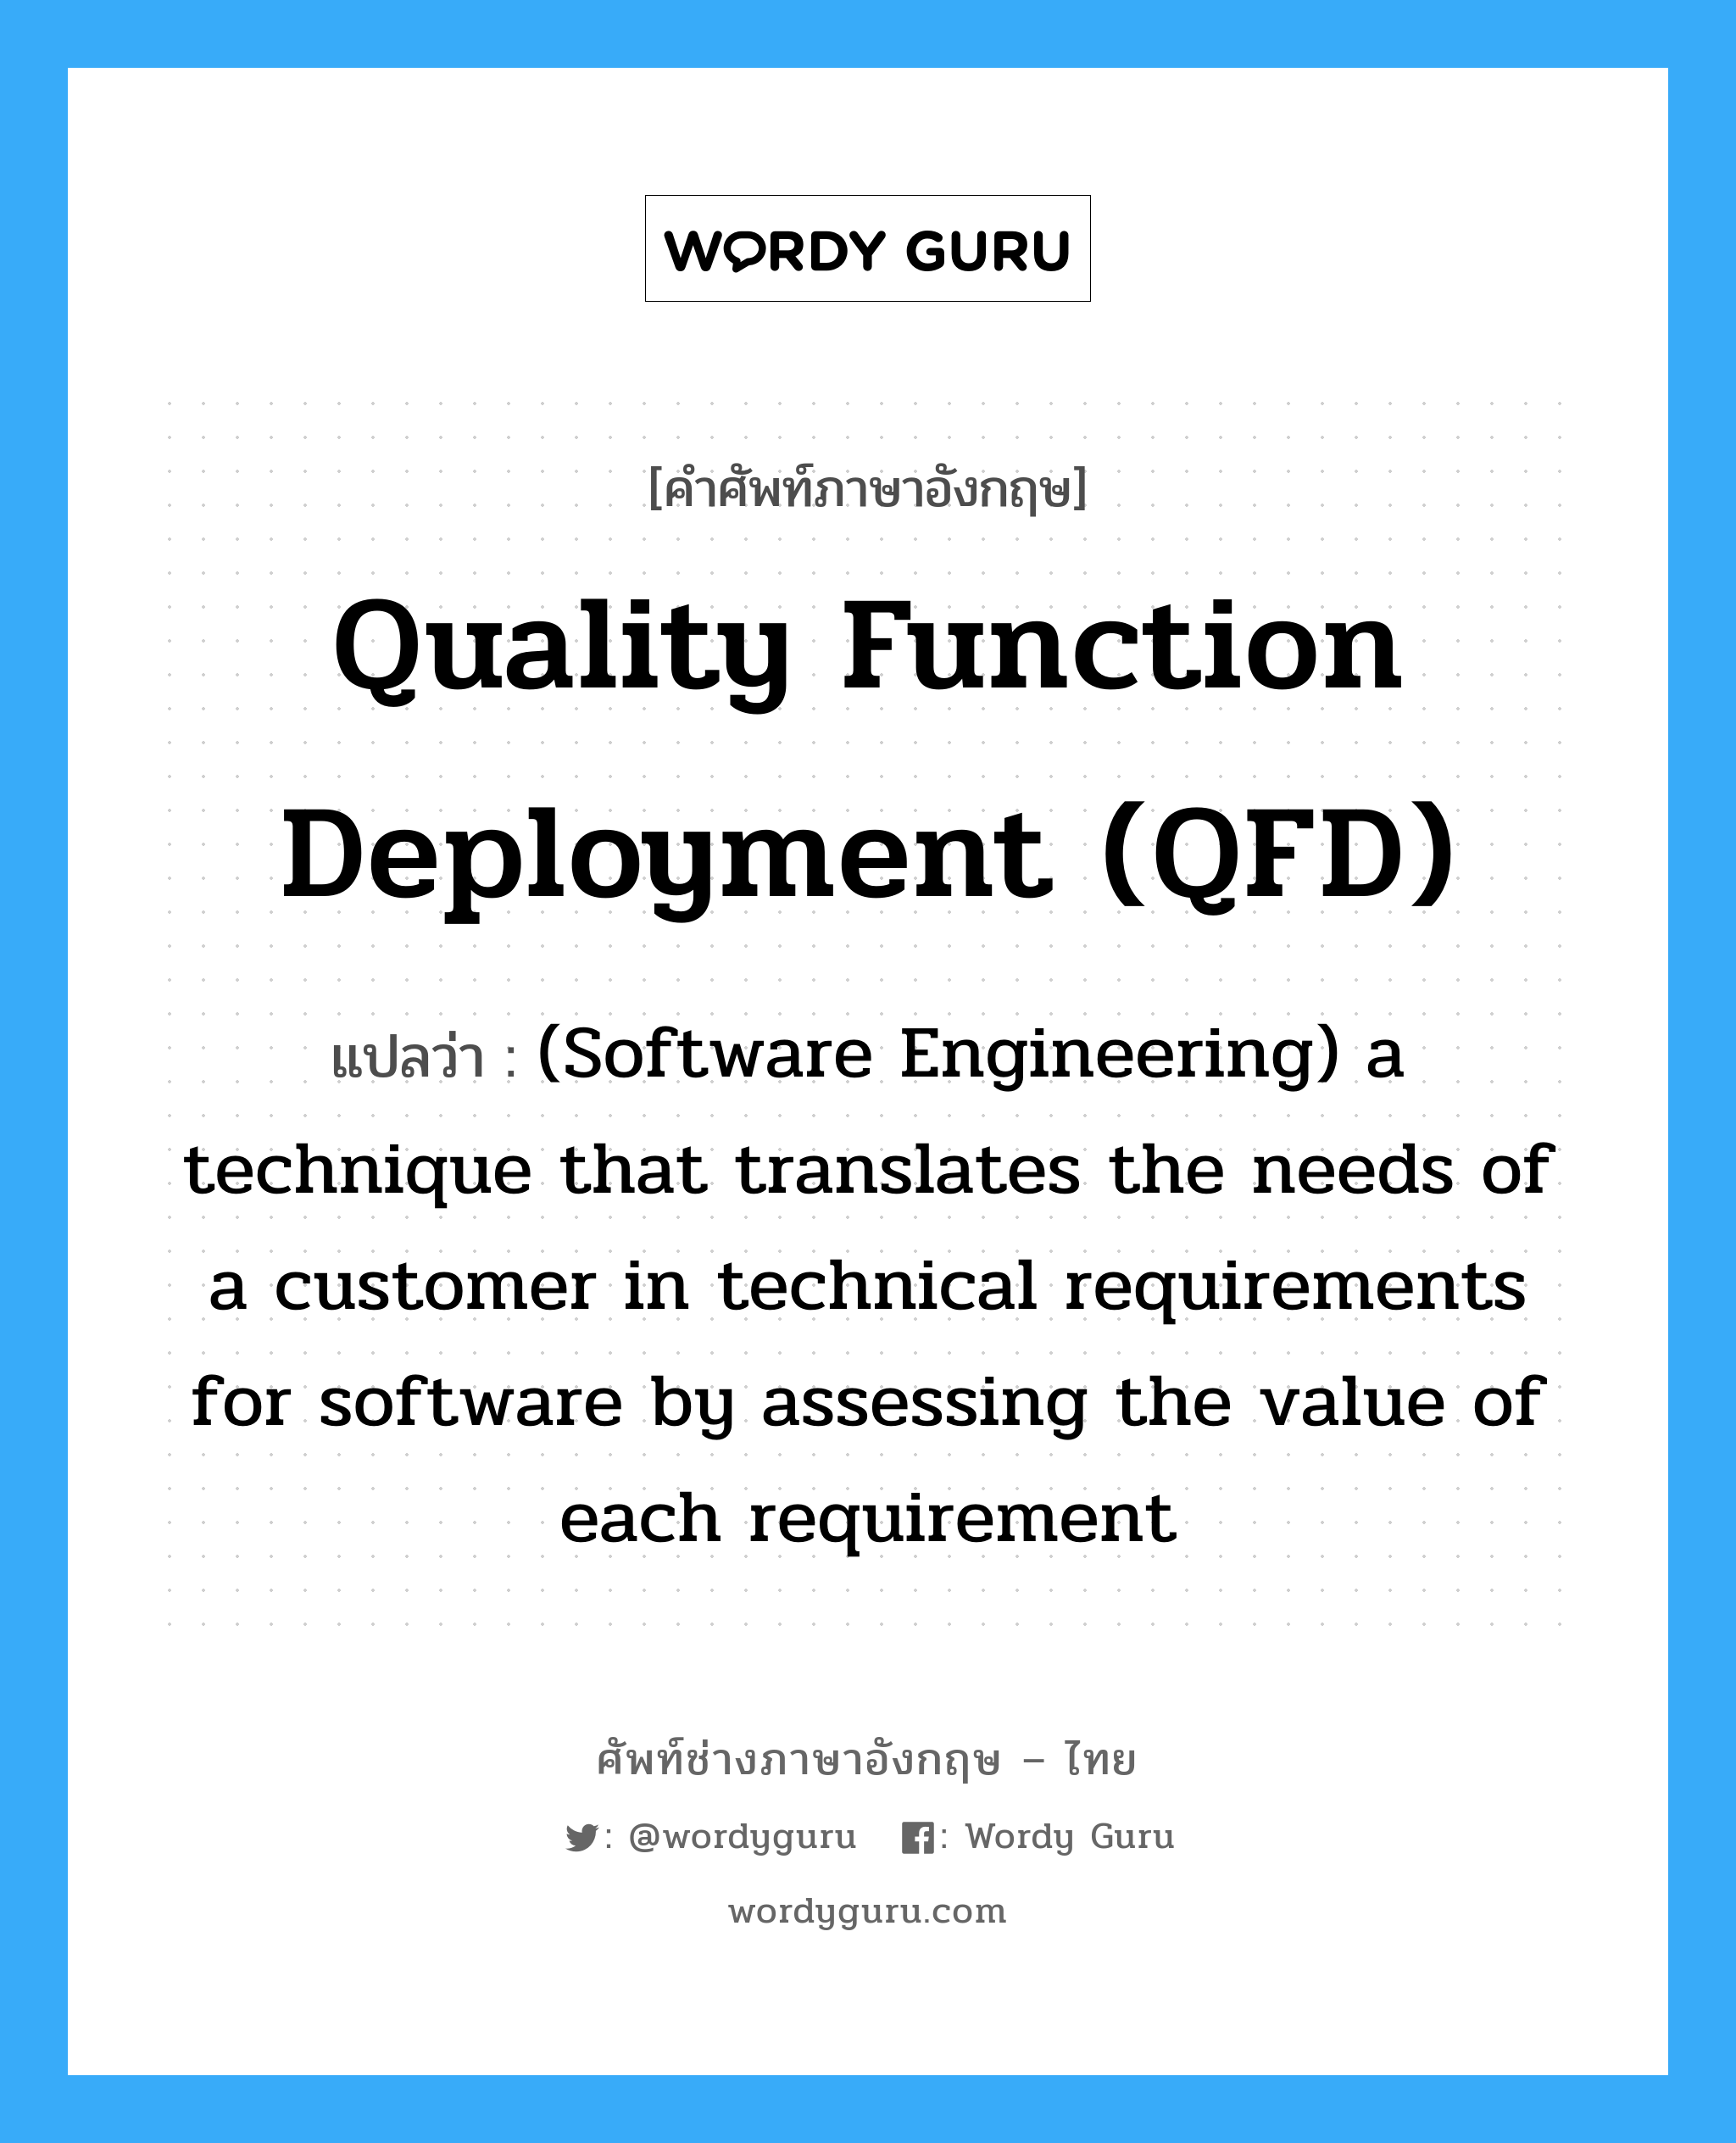 (Software Engineering) a technique that translates the needs of a customer in technical requirements for software by assessing the value of each requirement ภาษาอังกฤษ?, คำศัพท์ช่างภาษาอังกฤษ - ไทย (Software Engineering) a technique that translates the needs of a customer in technical requirements for software by assessing the value of each requirement คำศัพท์ภาษาอังกฤษ (Software Engineering) a technique that translates the needs of a customer in technical requirements for software by assessing the value of each requirement แปลว่า Quality function deployment (QFD)